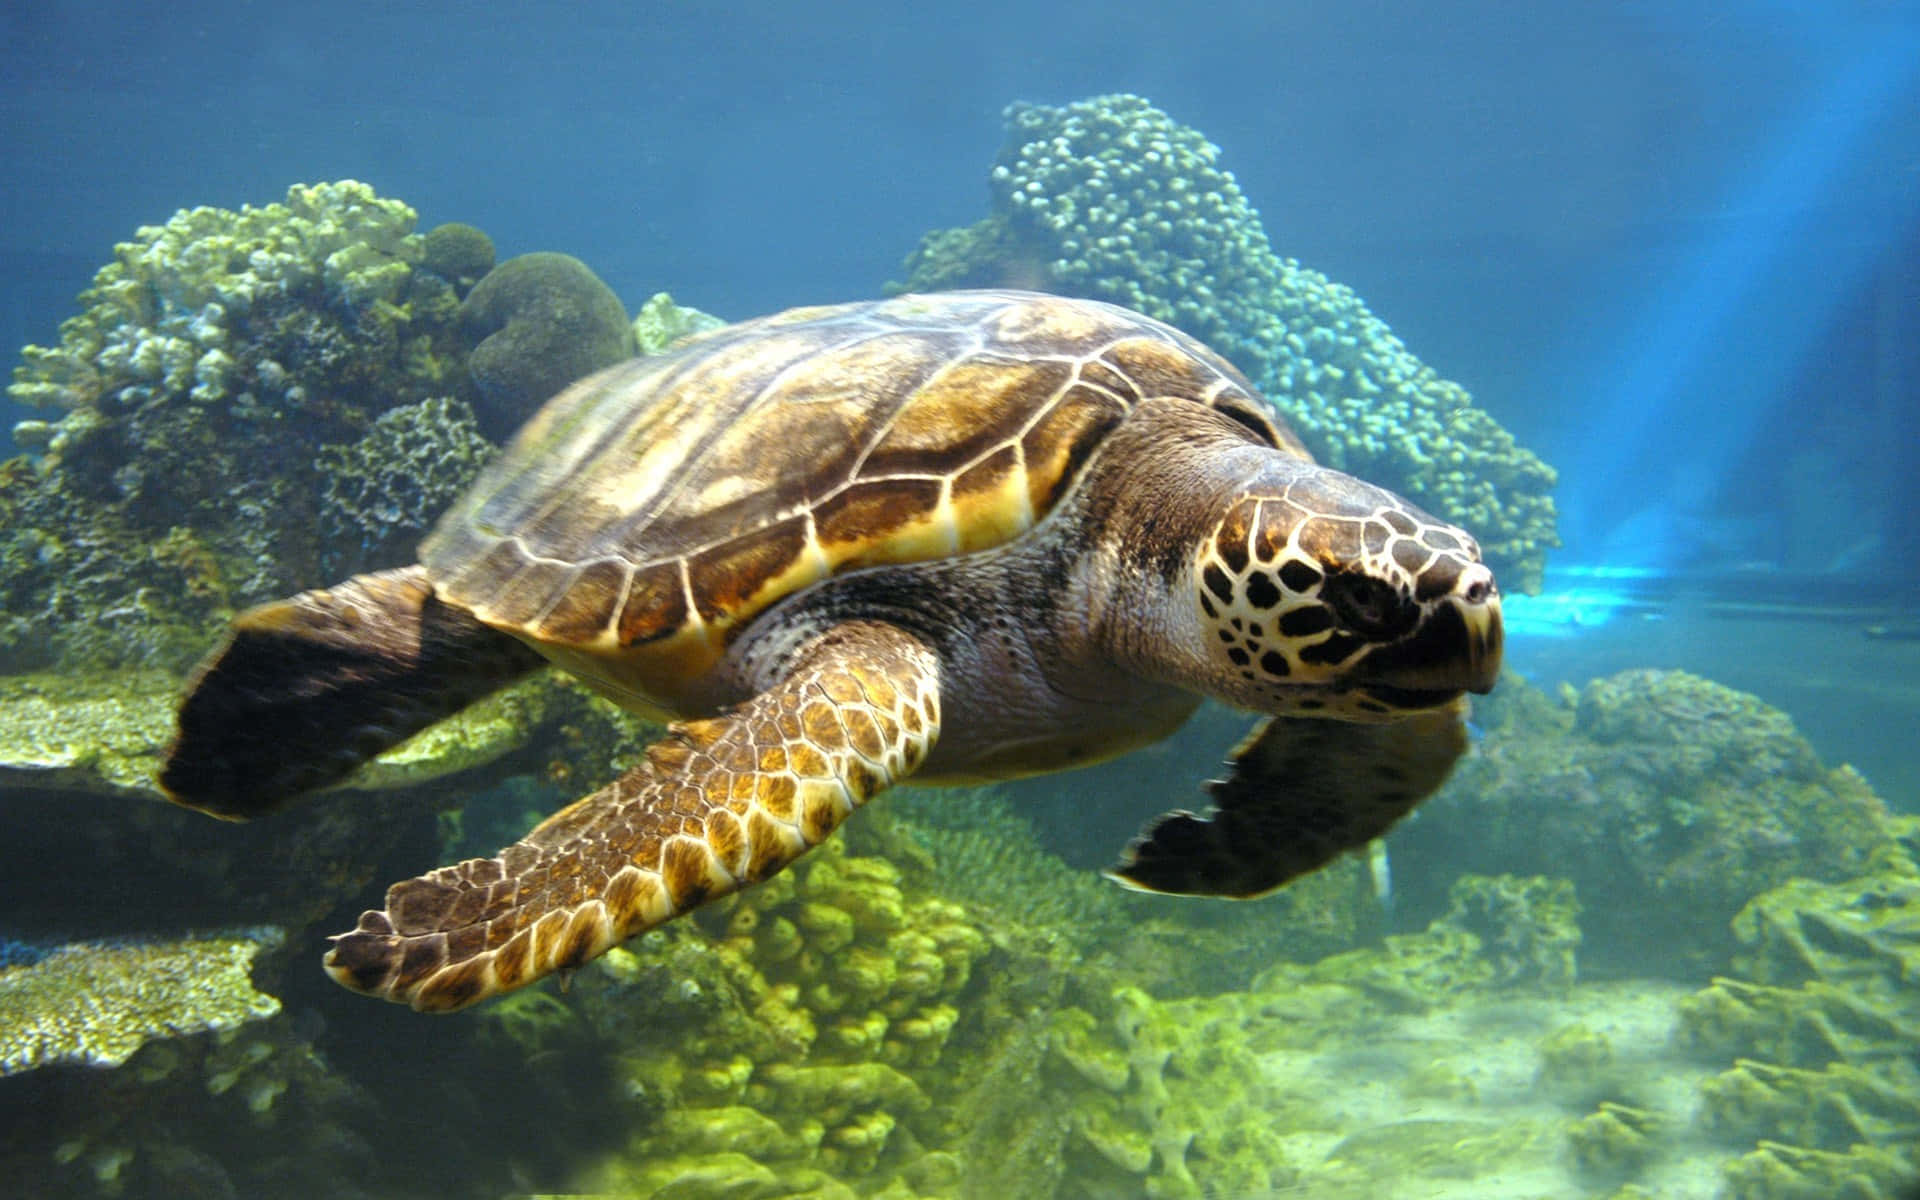 Caption: Majestic Sea Turtle Swimming in Crystal Clear Water